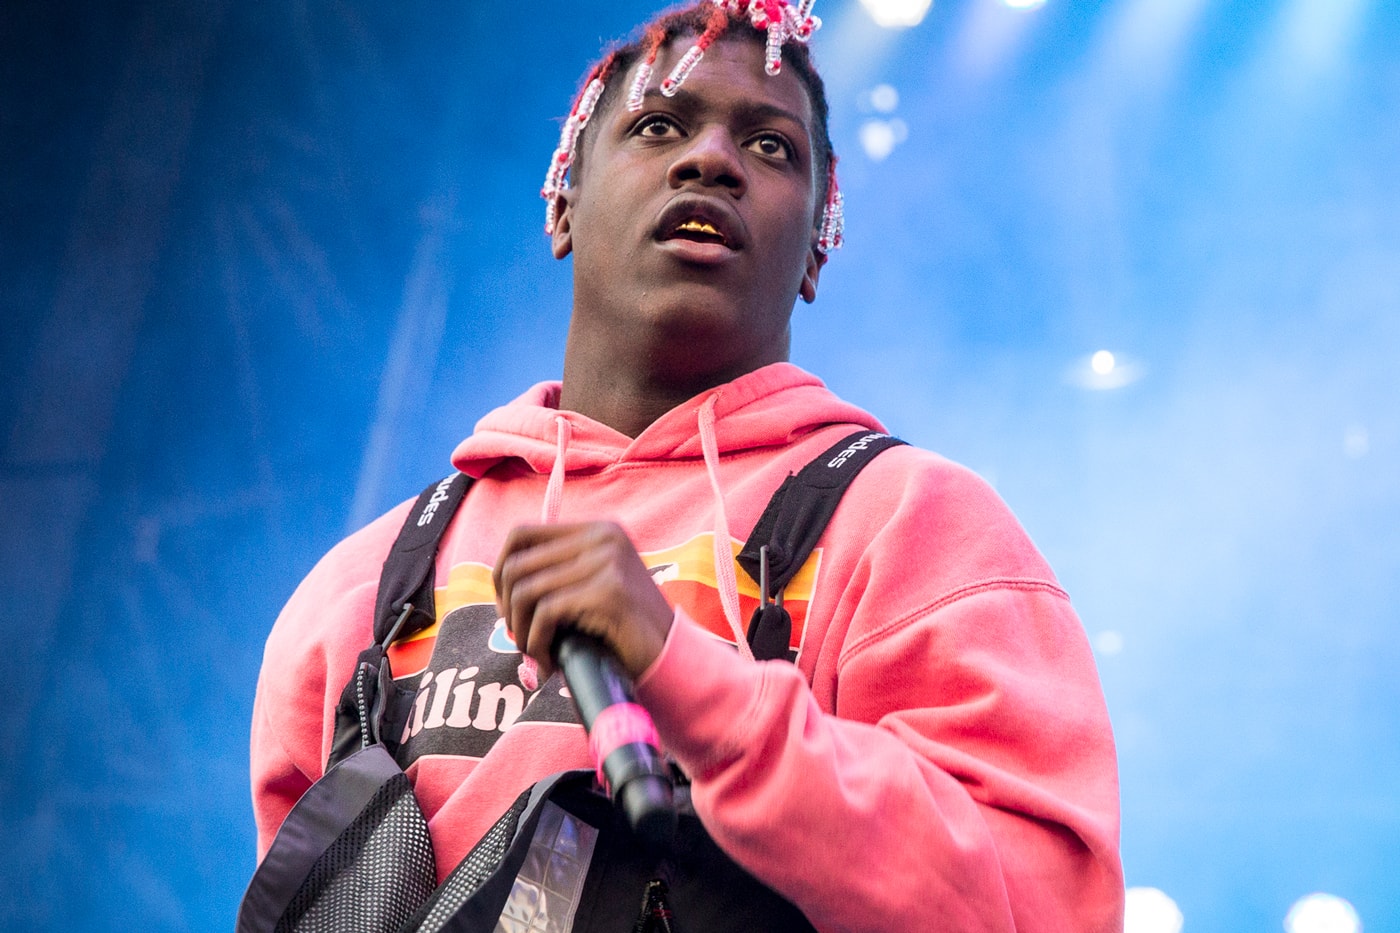 Lil Yachty Lil Boat 2 New Music Preview Pierre Bourne